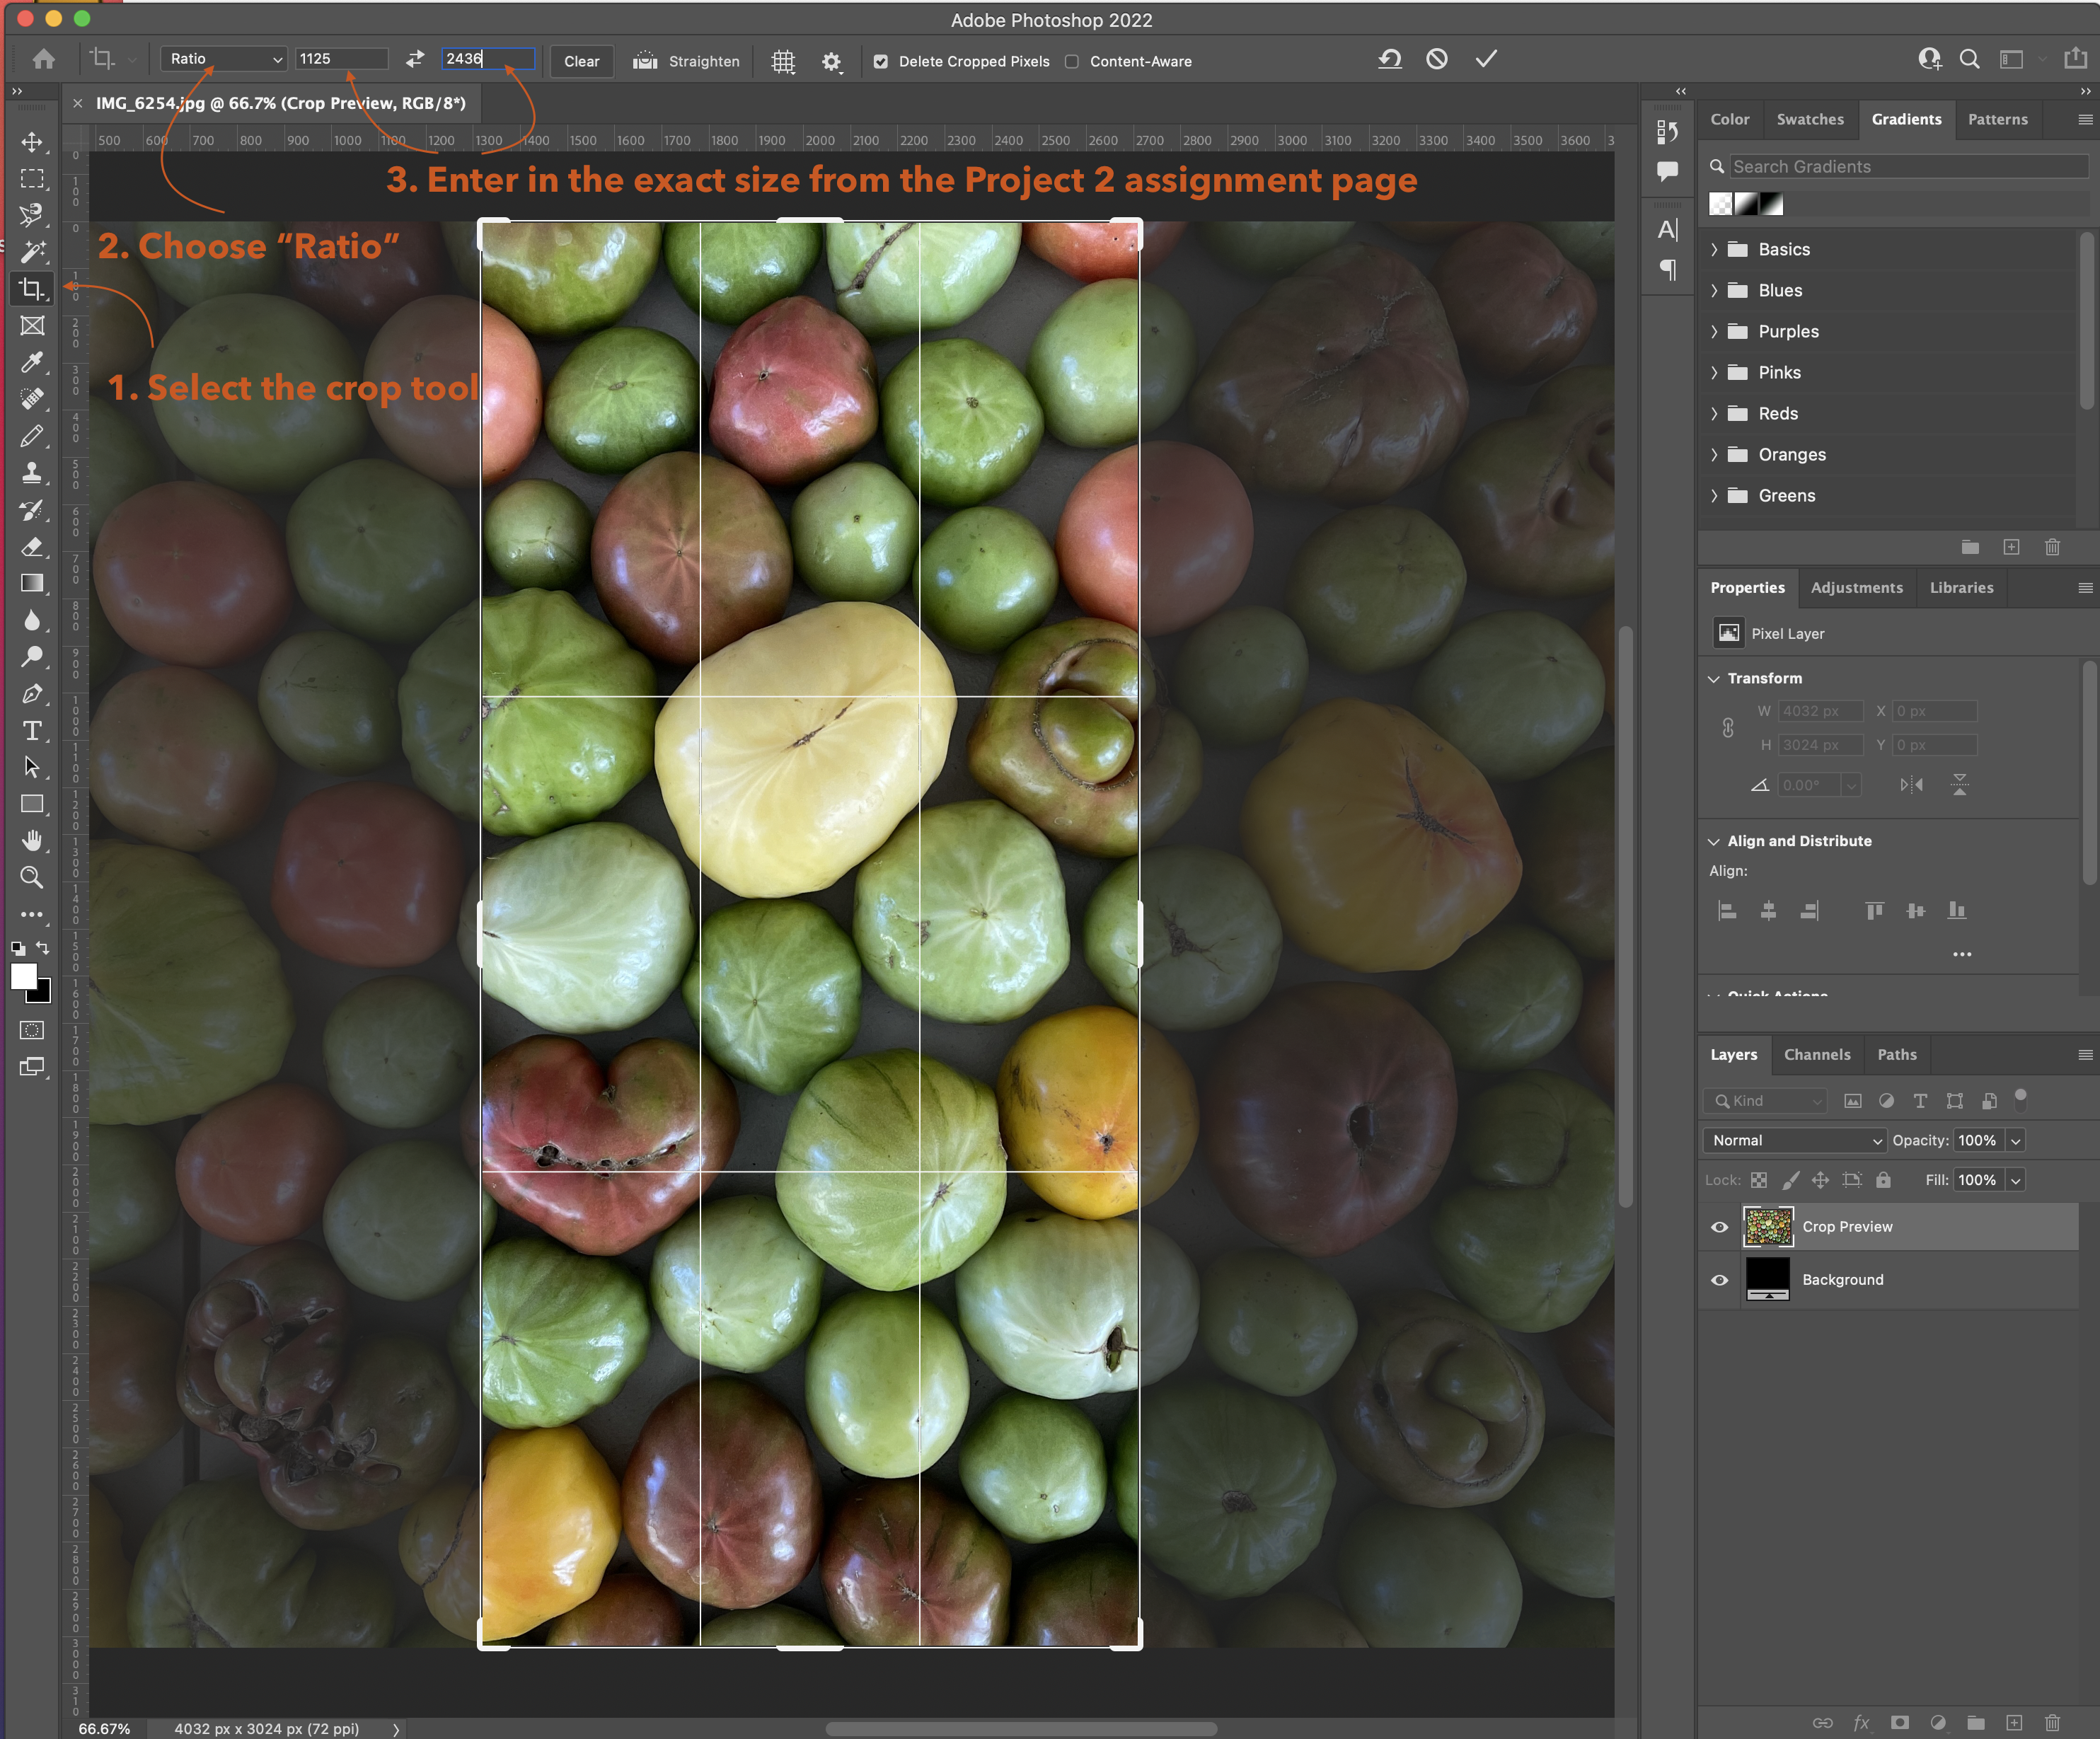 Screenshot of the Photoshop crop tool being used on a photographs of multi-colored large tomatoes.